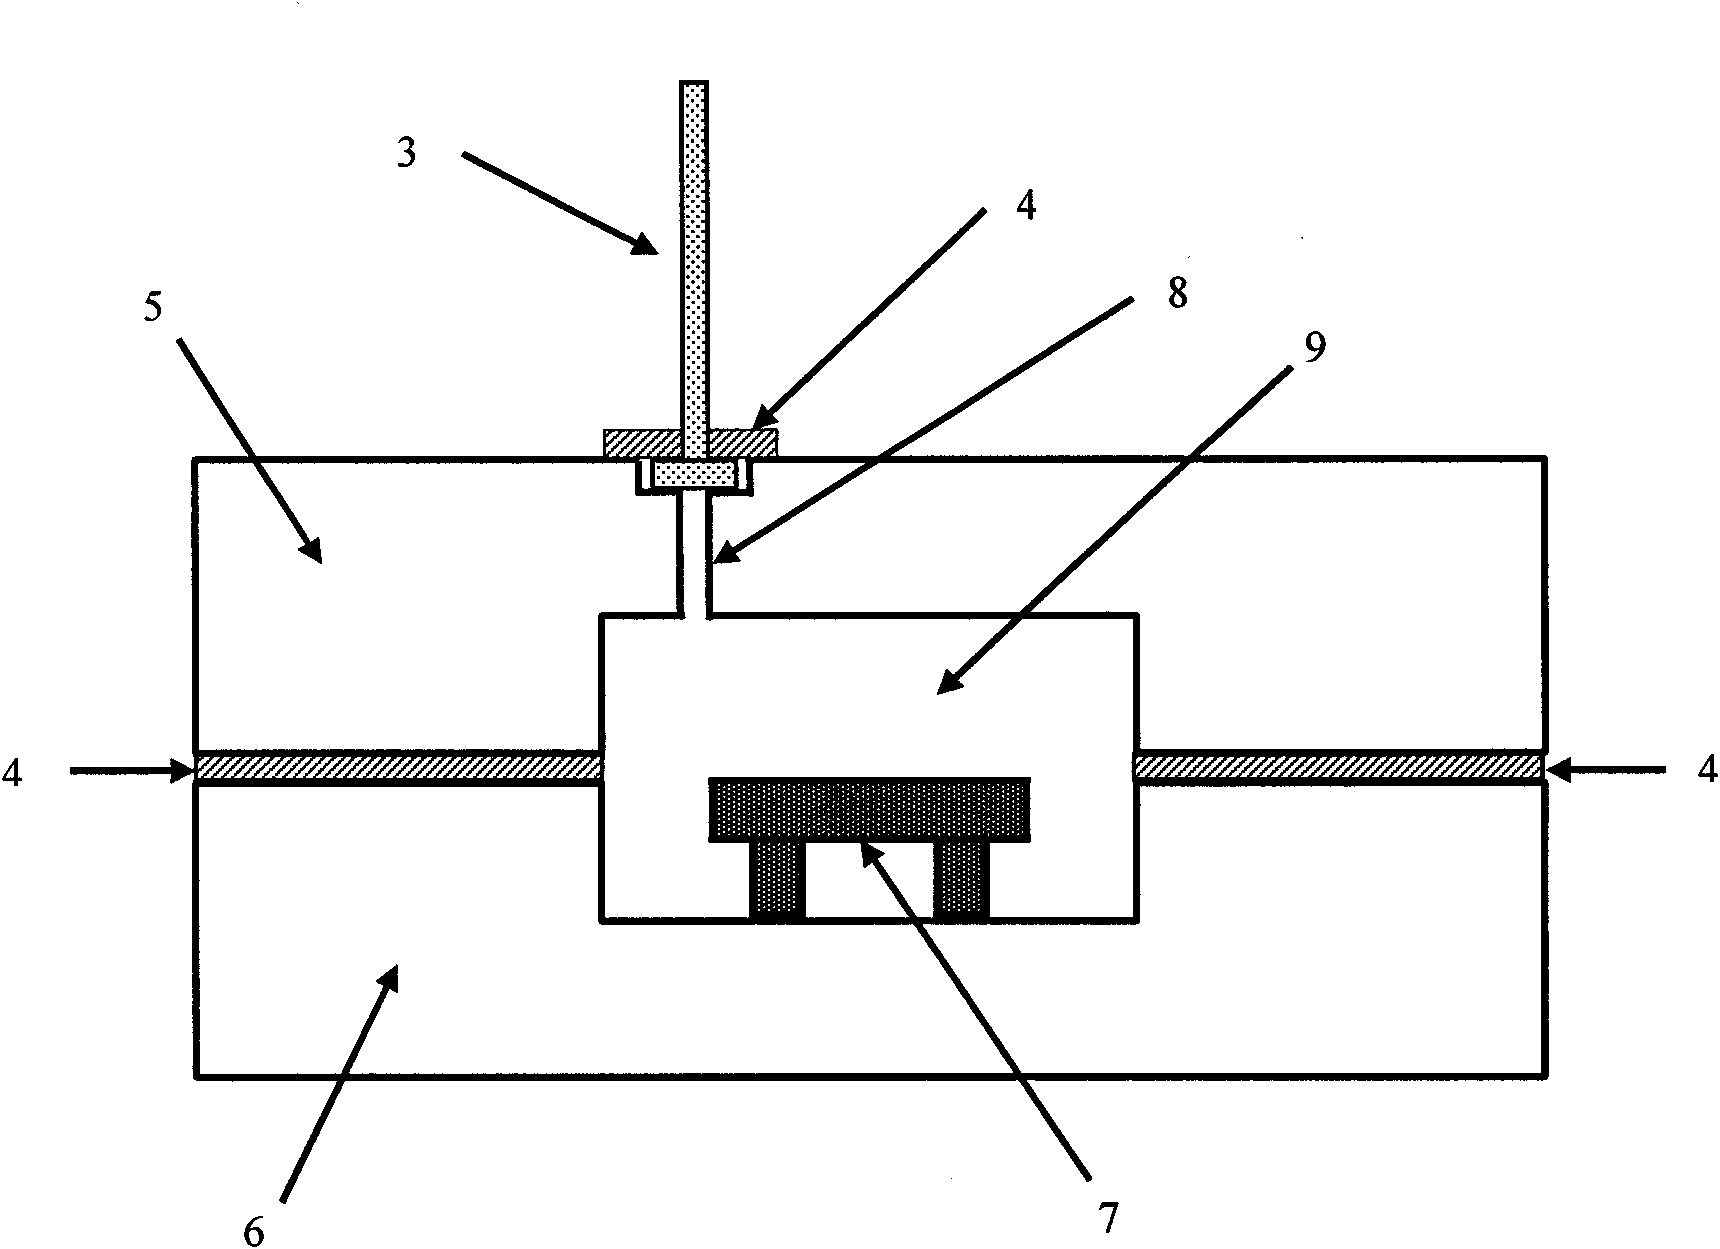 Low temperature co-fired ceramic-based micro-electromechanical system (MEMS) packaging method